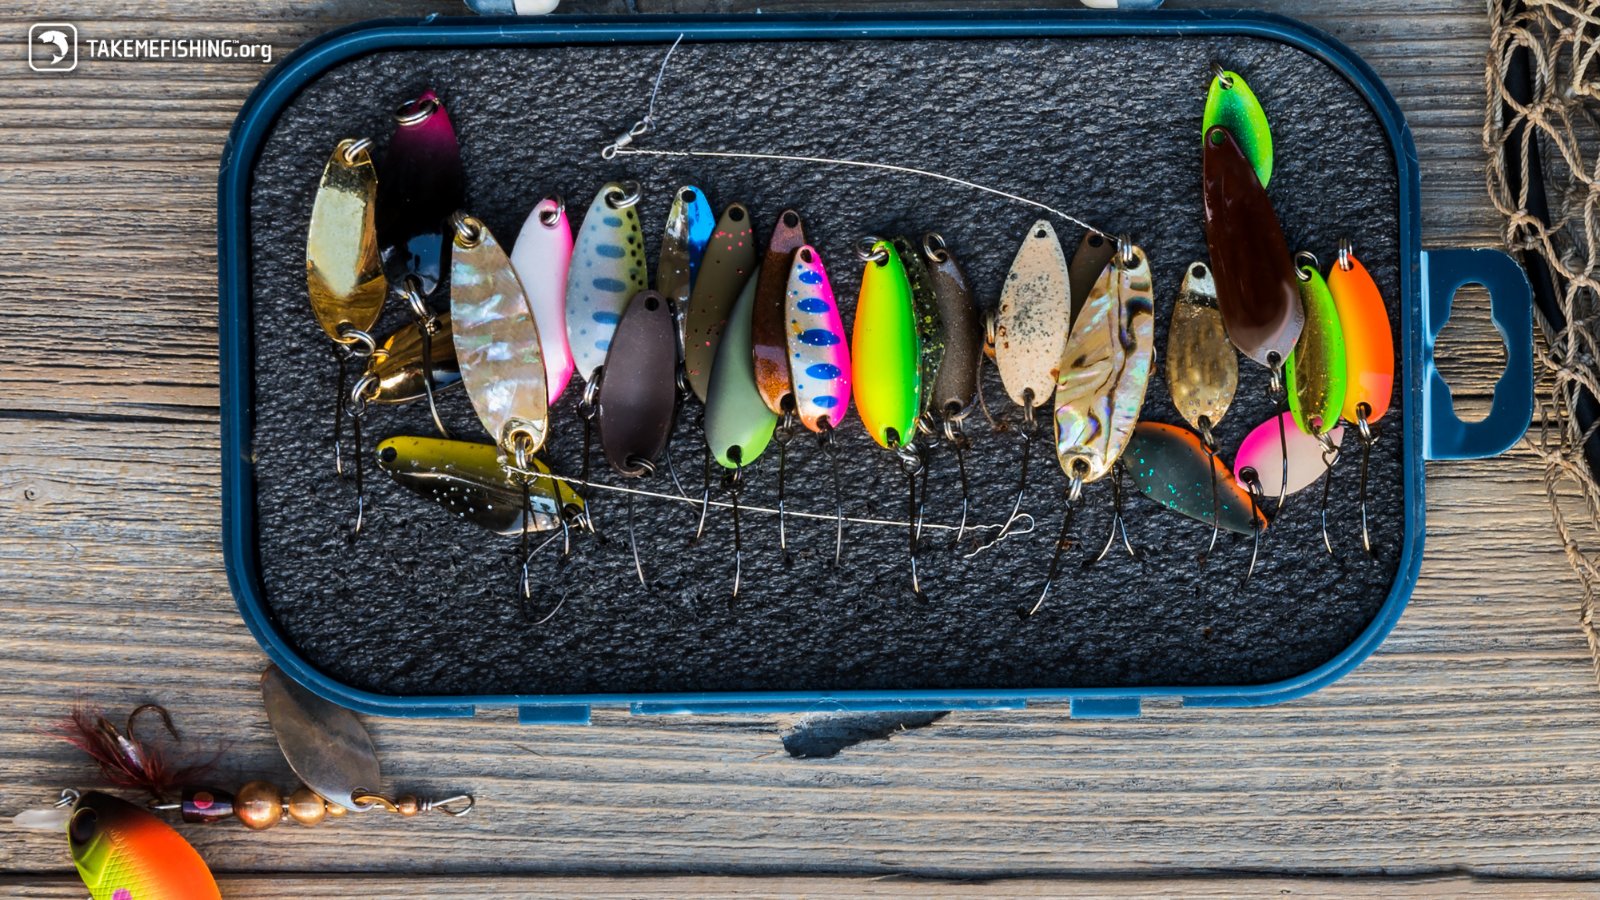 Take Me Fishing on X: We just like new tackle. New tackle is our